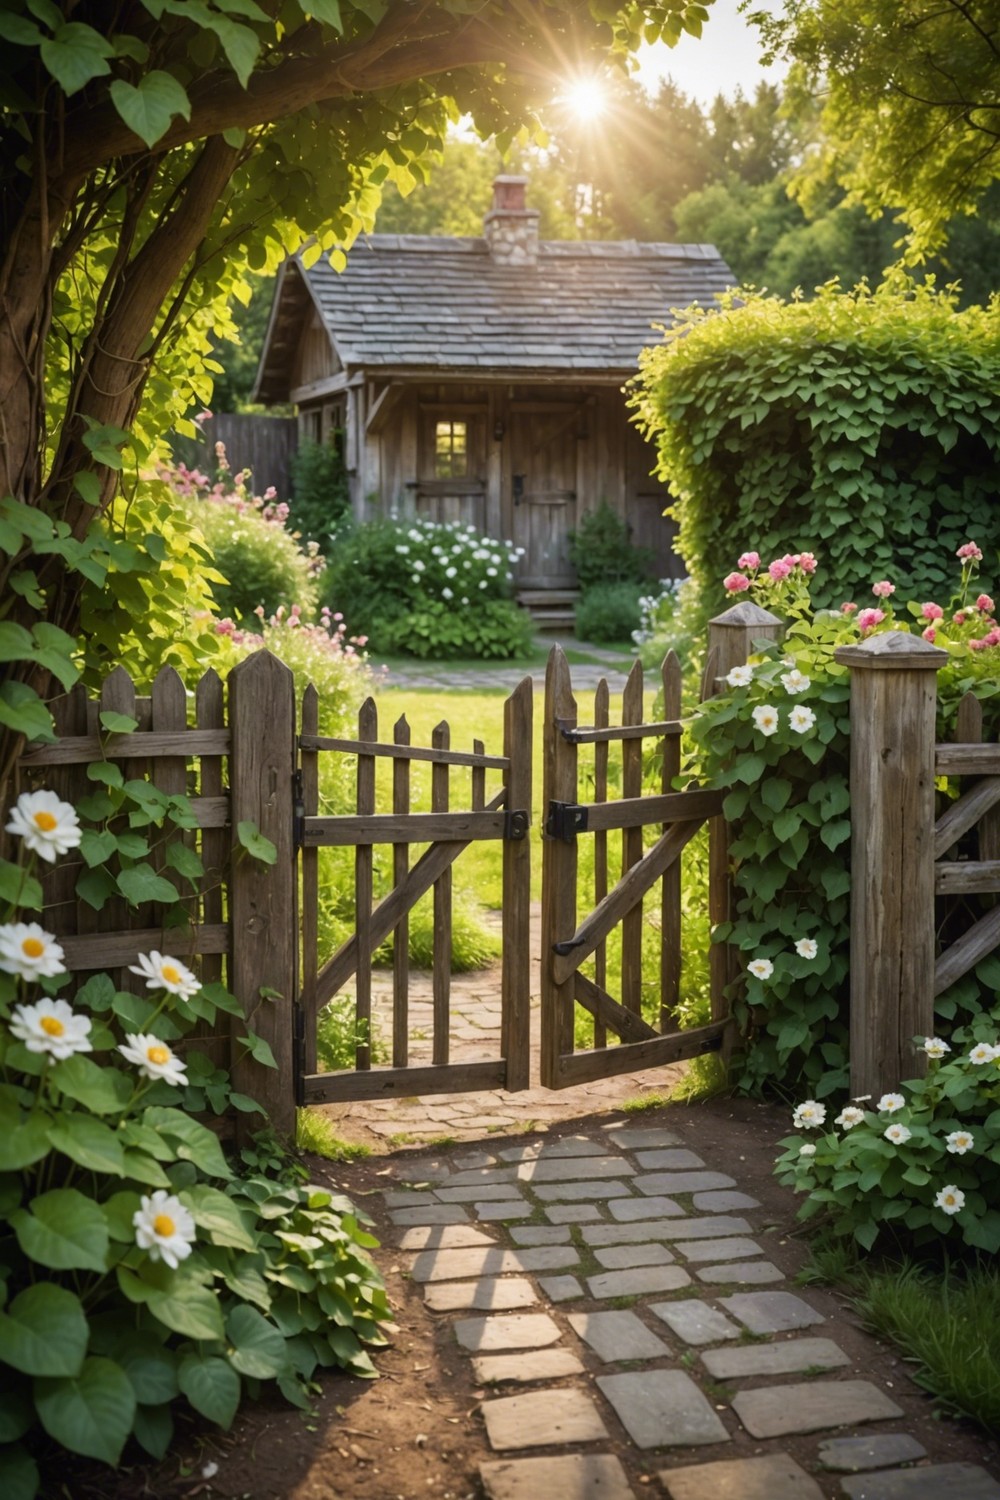 Rustic Wooden Fences and Gates